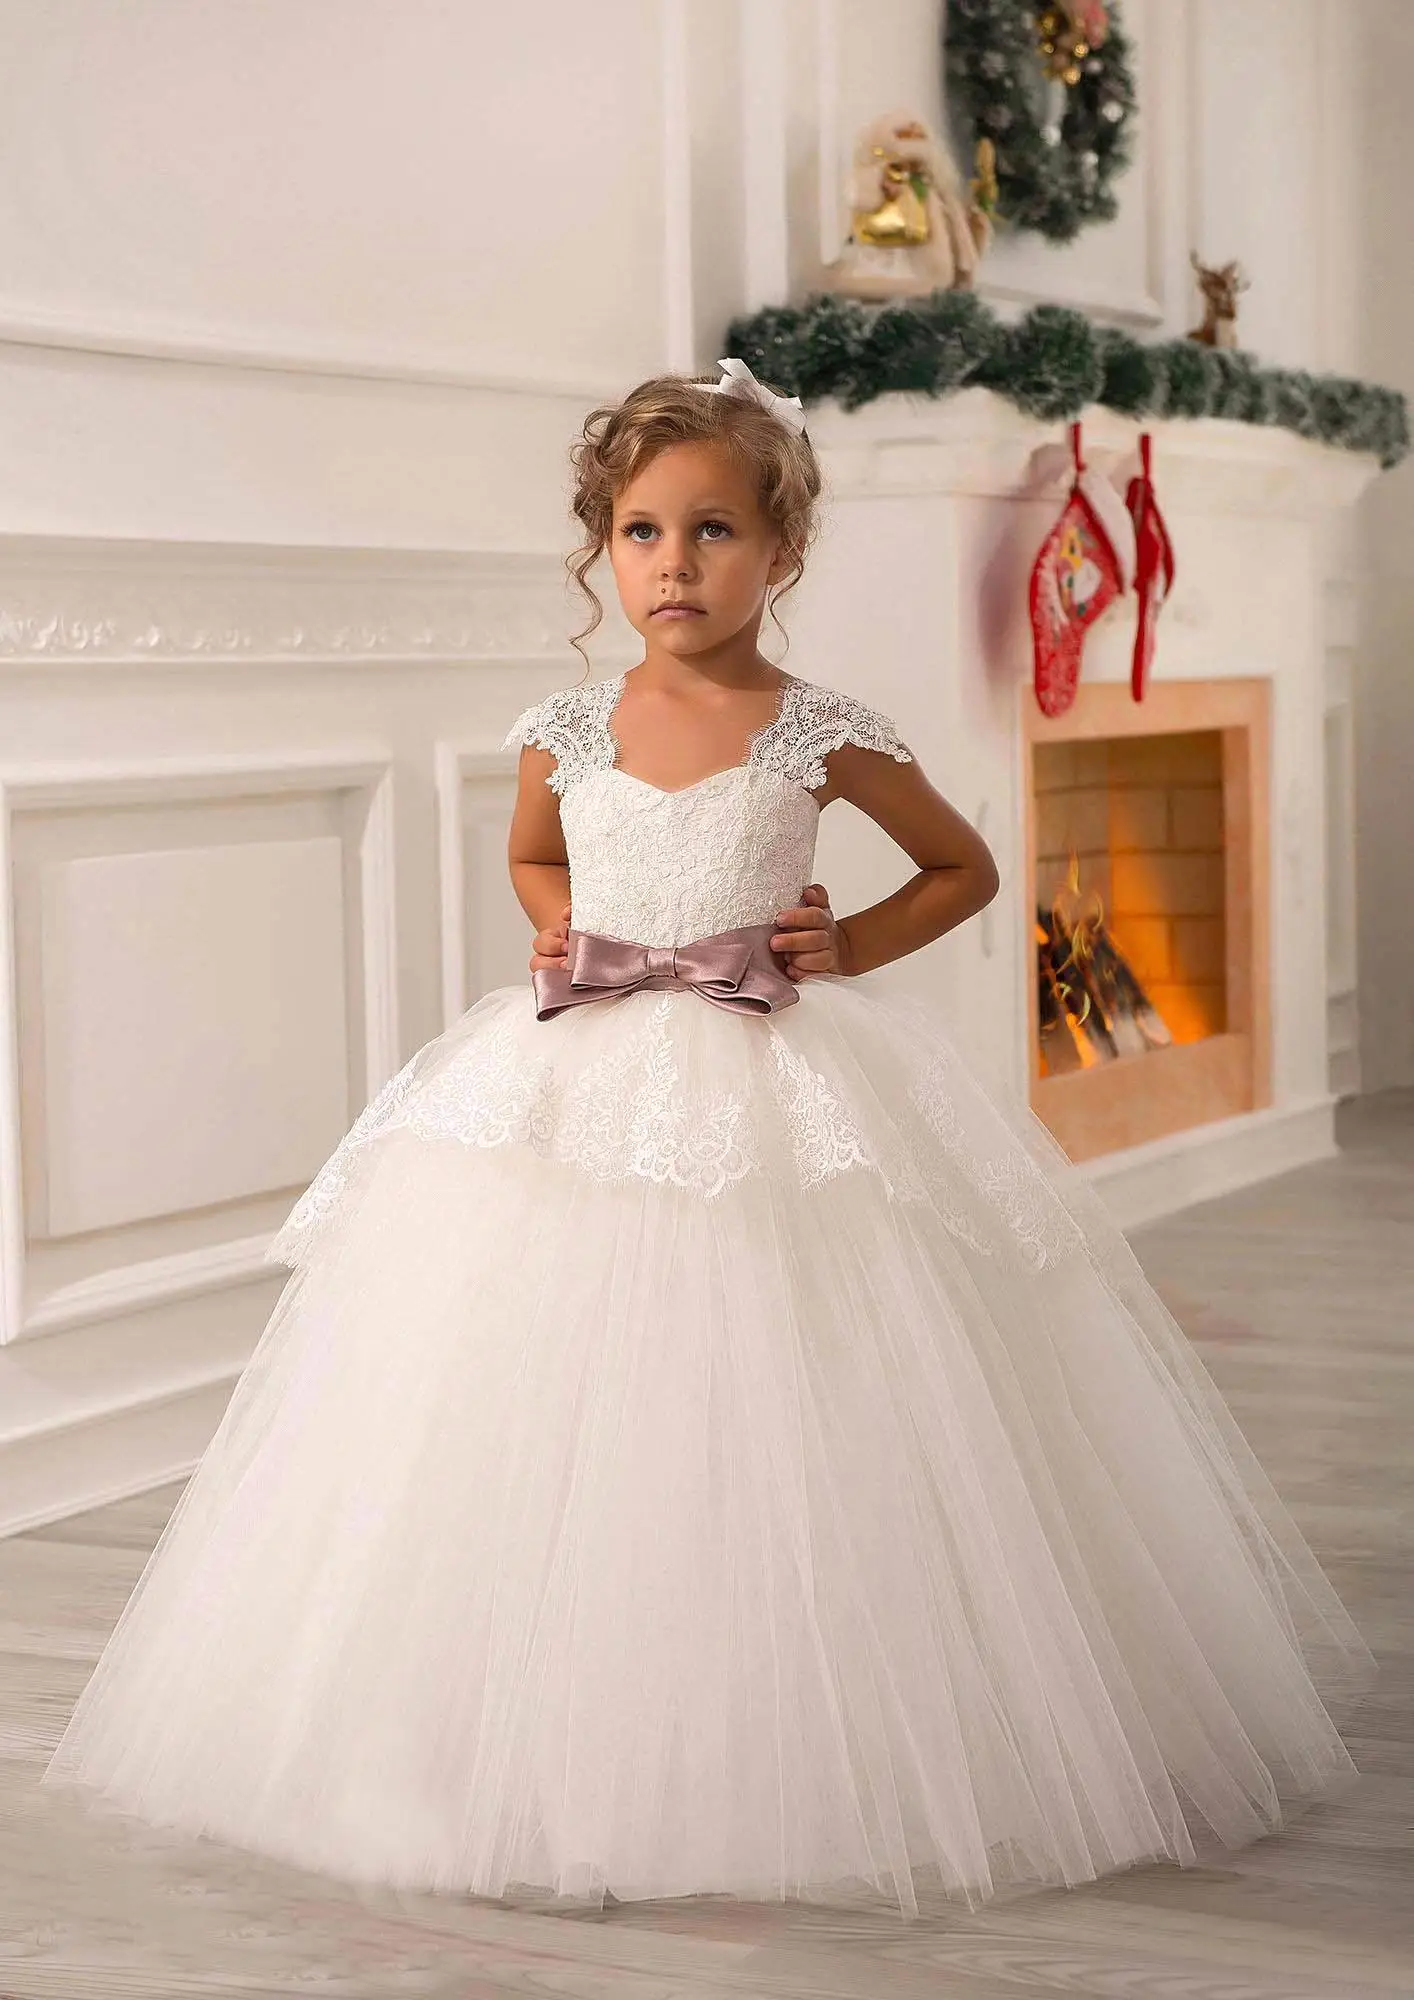 The most popular flower girl dresses - Fashion Industry 